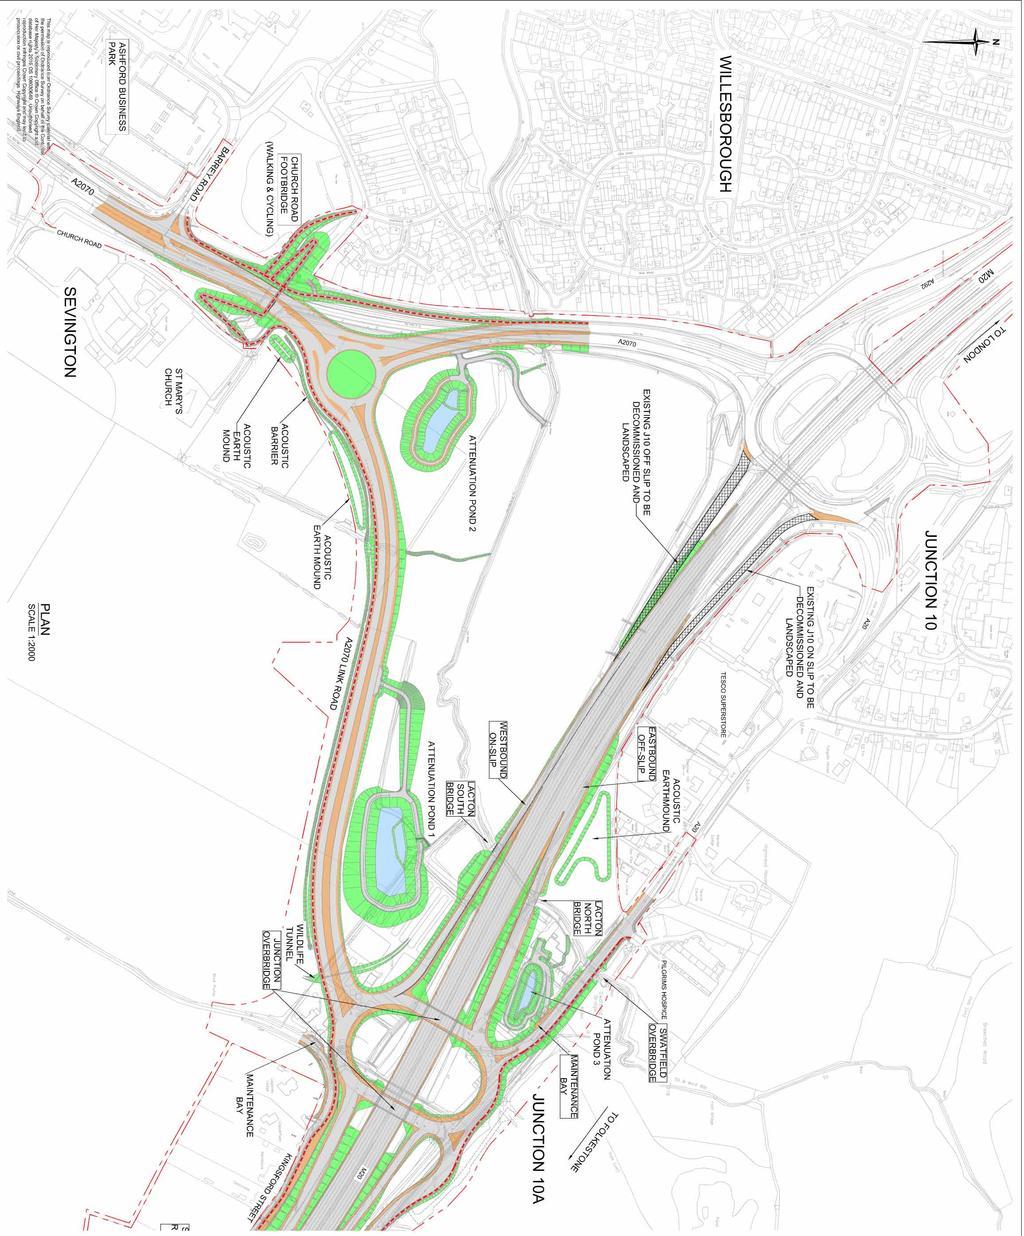 Scheme layout M20 j10a General arrangement drawing Features of the proposed design New interchange junction 700 metres east of junction 10 over the M20.